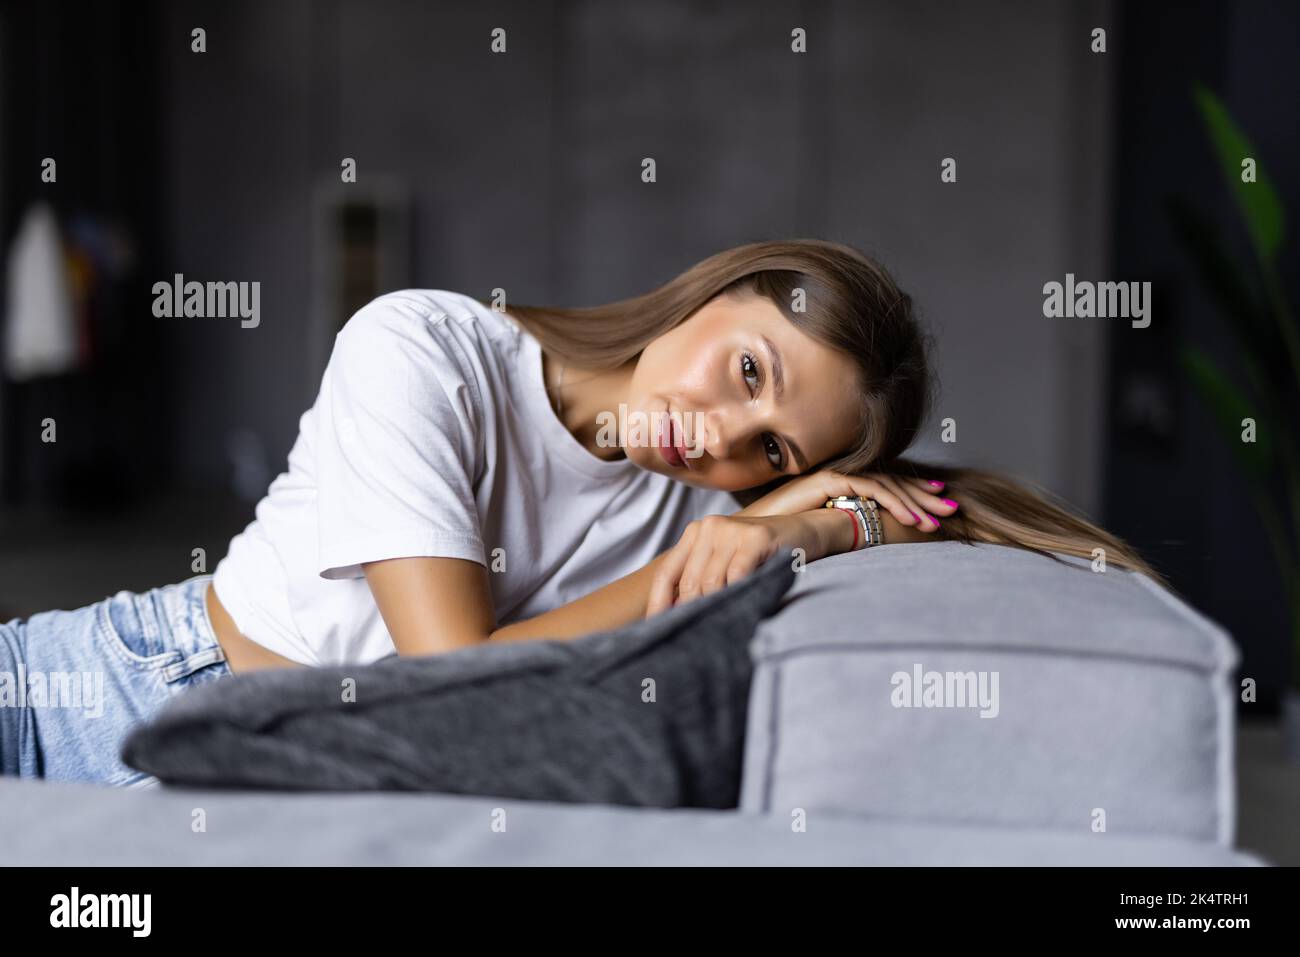 Smiling pretty woman wearing casual clothes relaxing on a couch at home Stock Photo